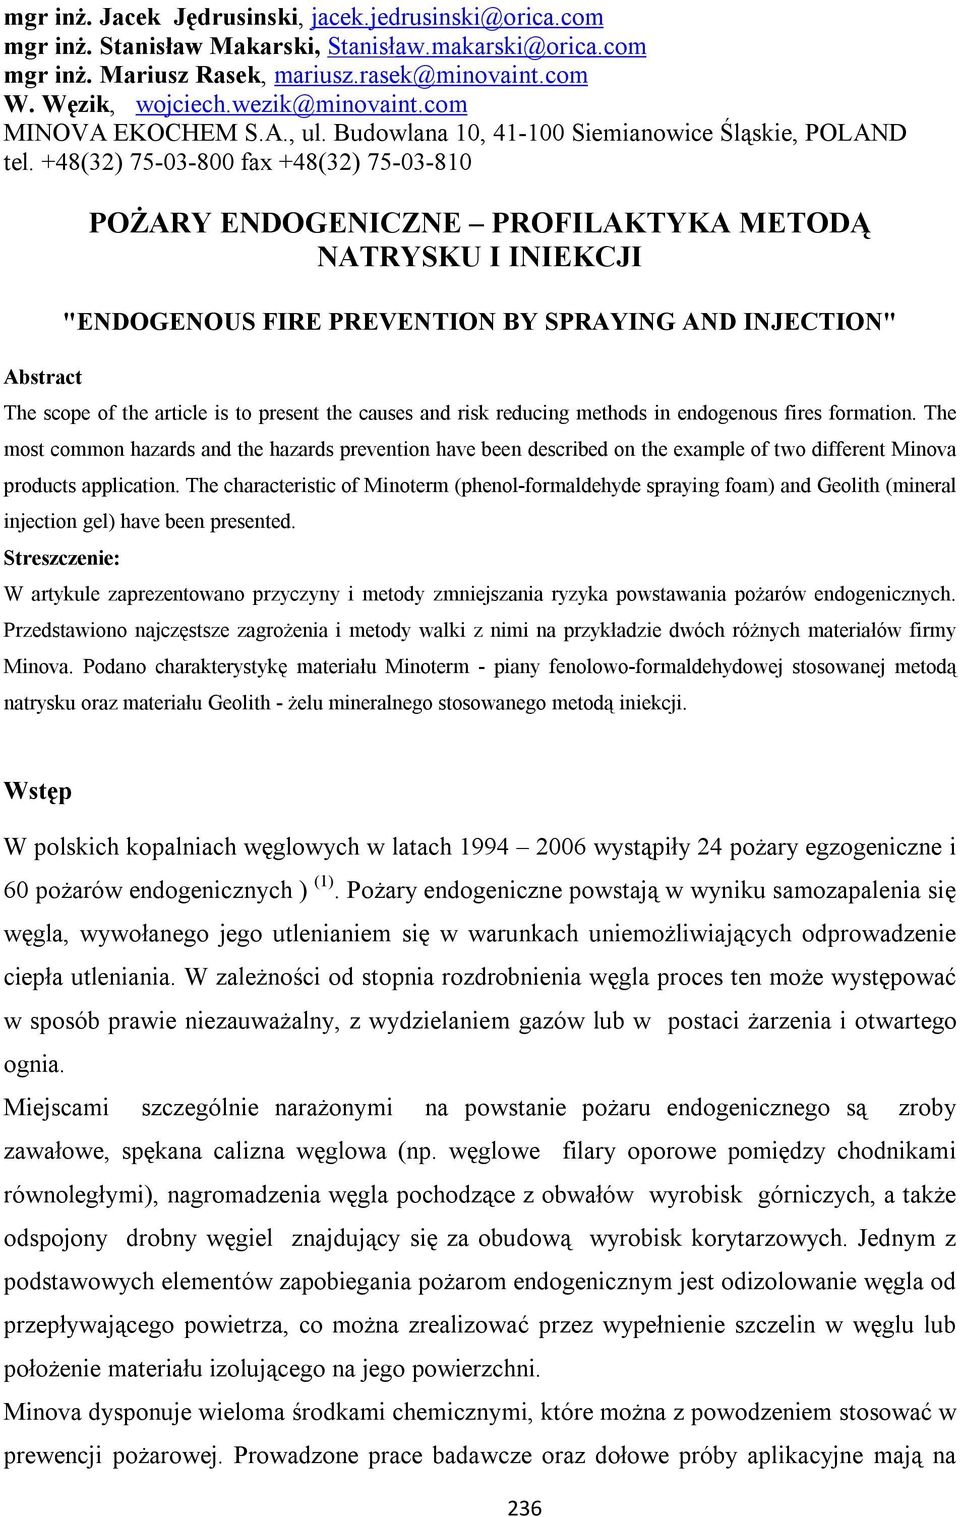 +48(32) 75-03-800 fax +48(32) 75-03-810 Abstract POŻARY ENDOGENICZNE PROFILAKTYKA METODĄ NATRYSKU I INIEKCJI "ENDOGENOUS FIRE PREVENTION BY SPRAYING AND INJECTION" The scope of the article is to